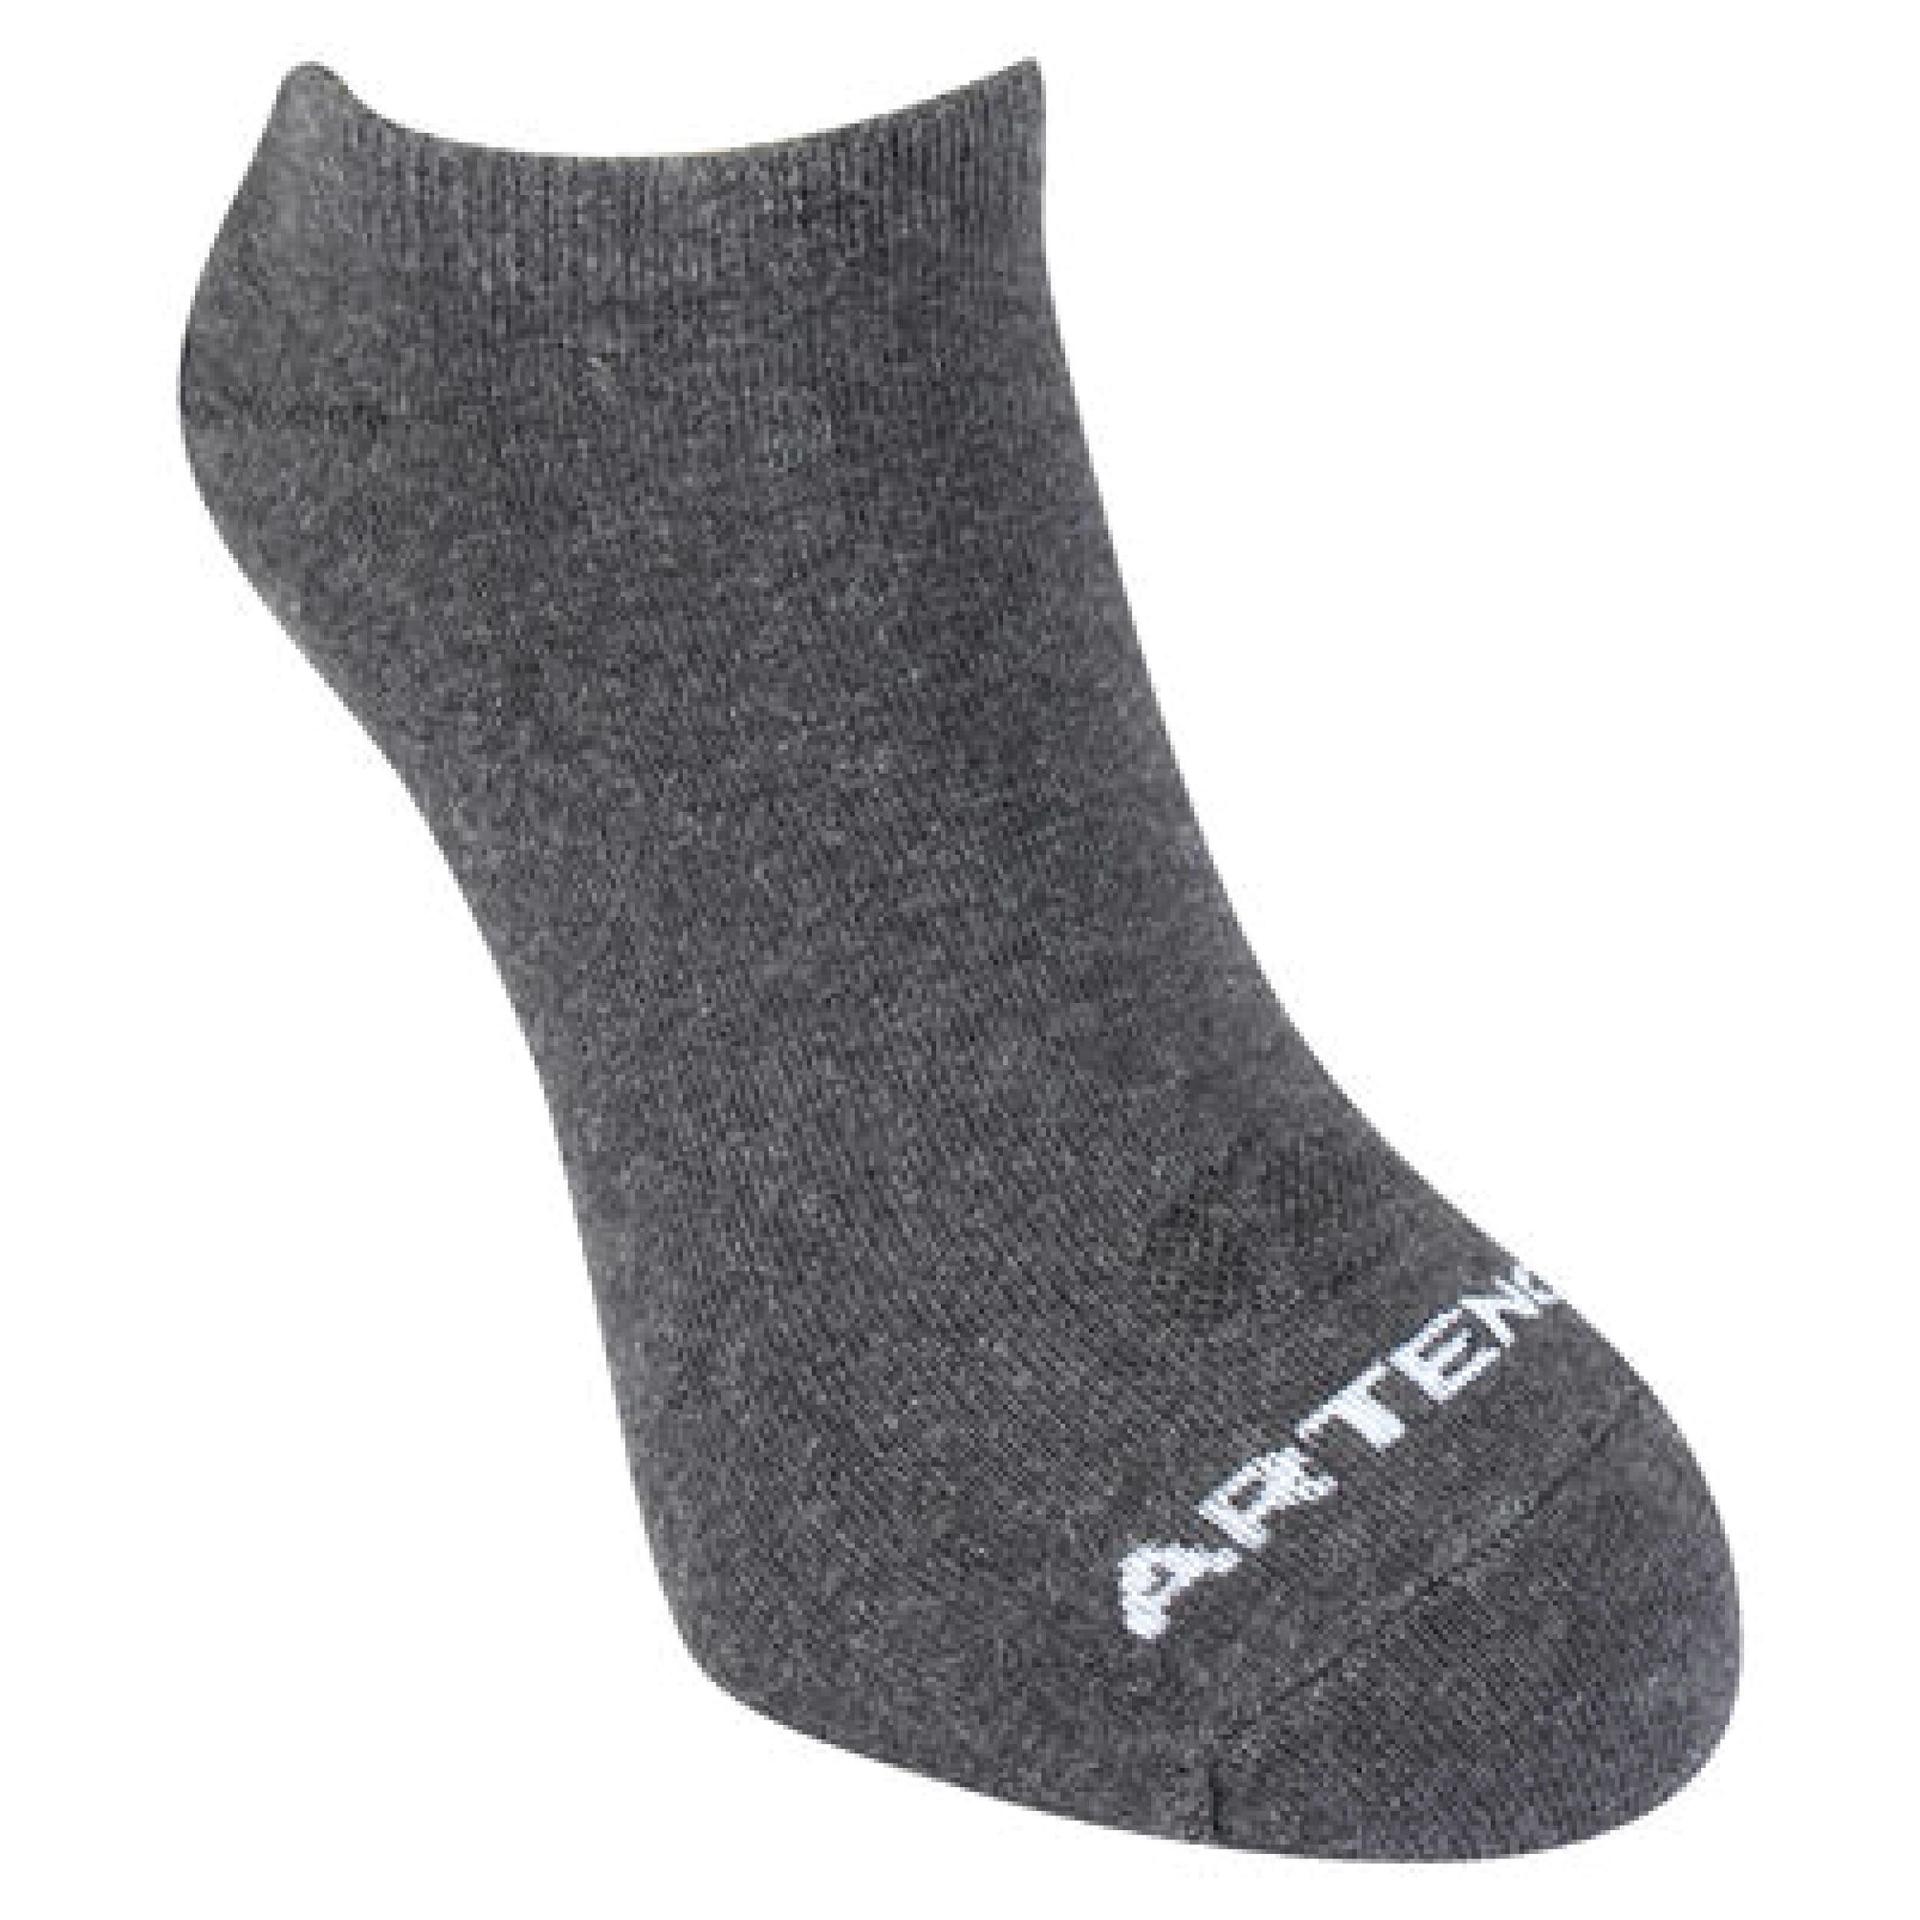 adult-tennis-socks-low-ankle-x1---rs160-grey